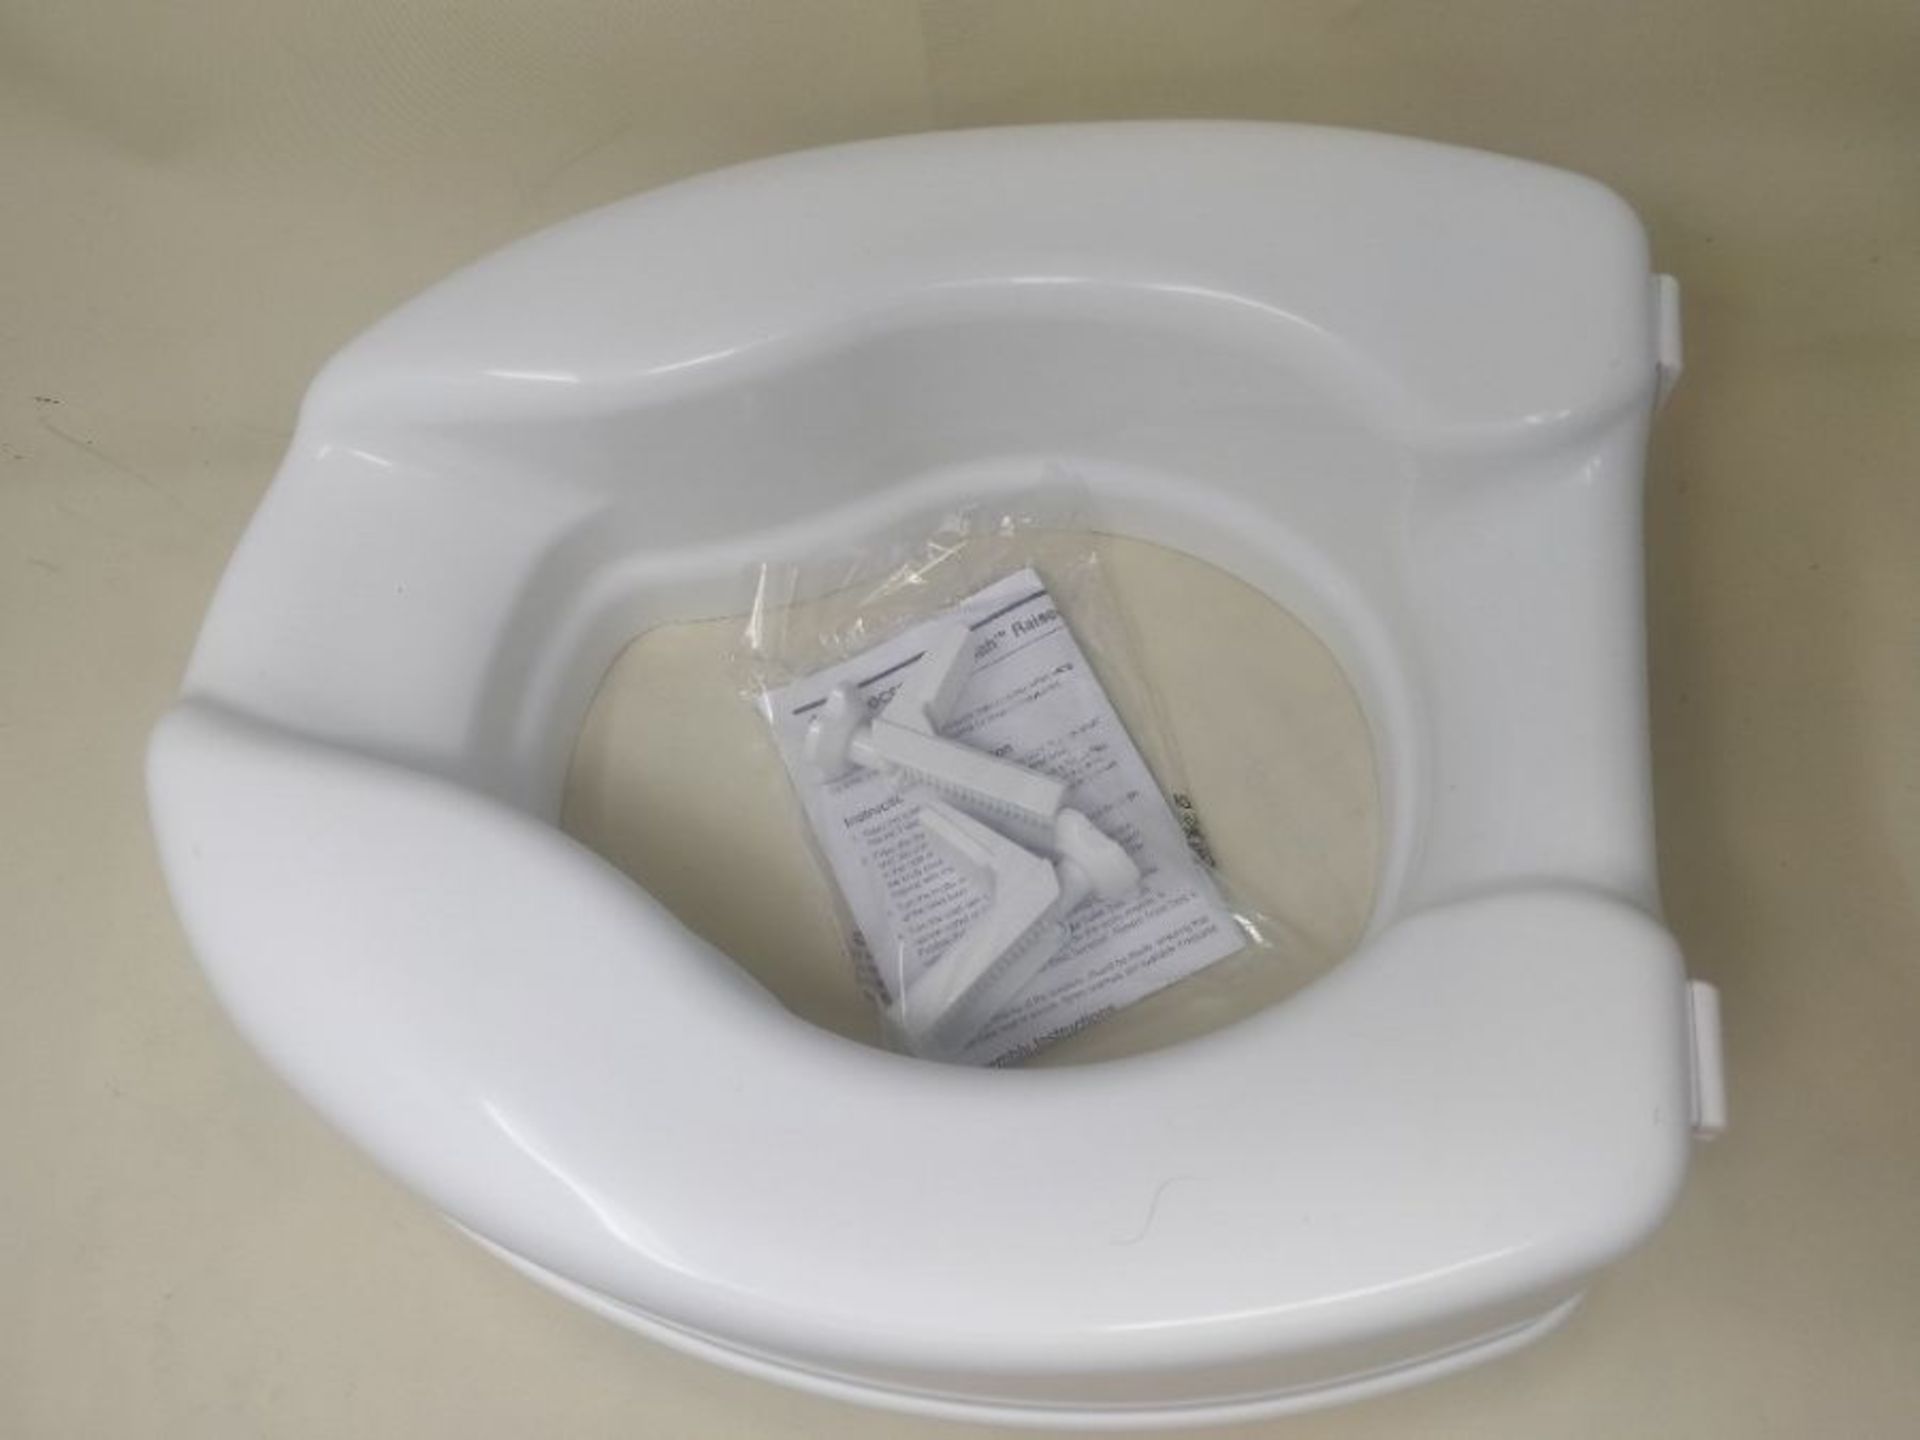 Homecraft Savanah Raised Toilet Seat without Lid, Elongated & Elevated Lock Seat Suppo - Image 3 of 3